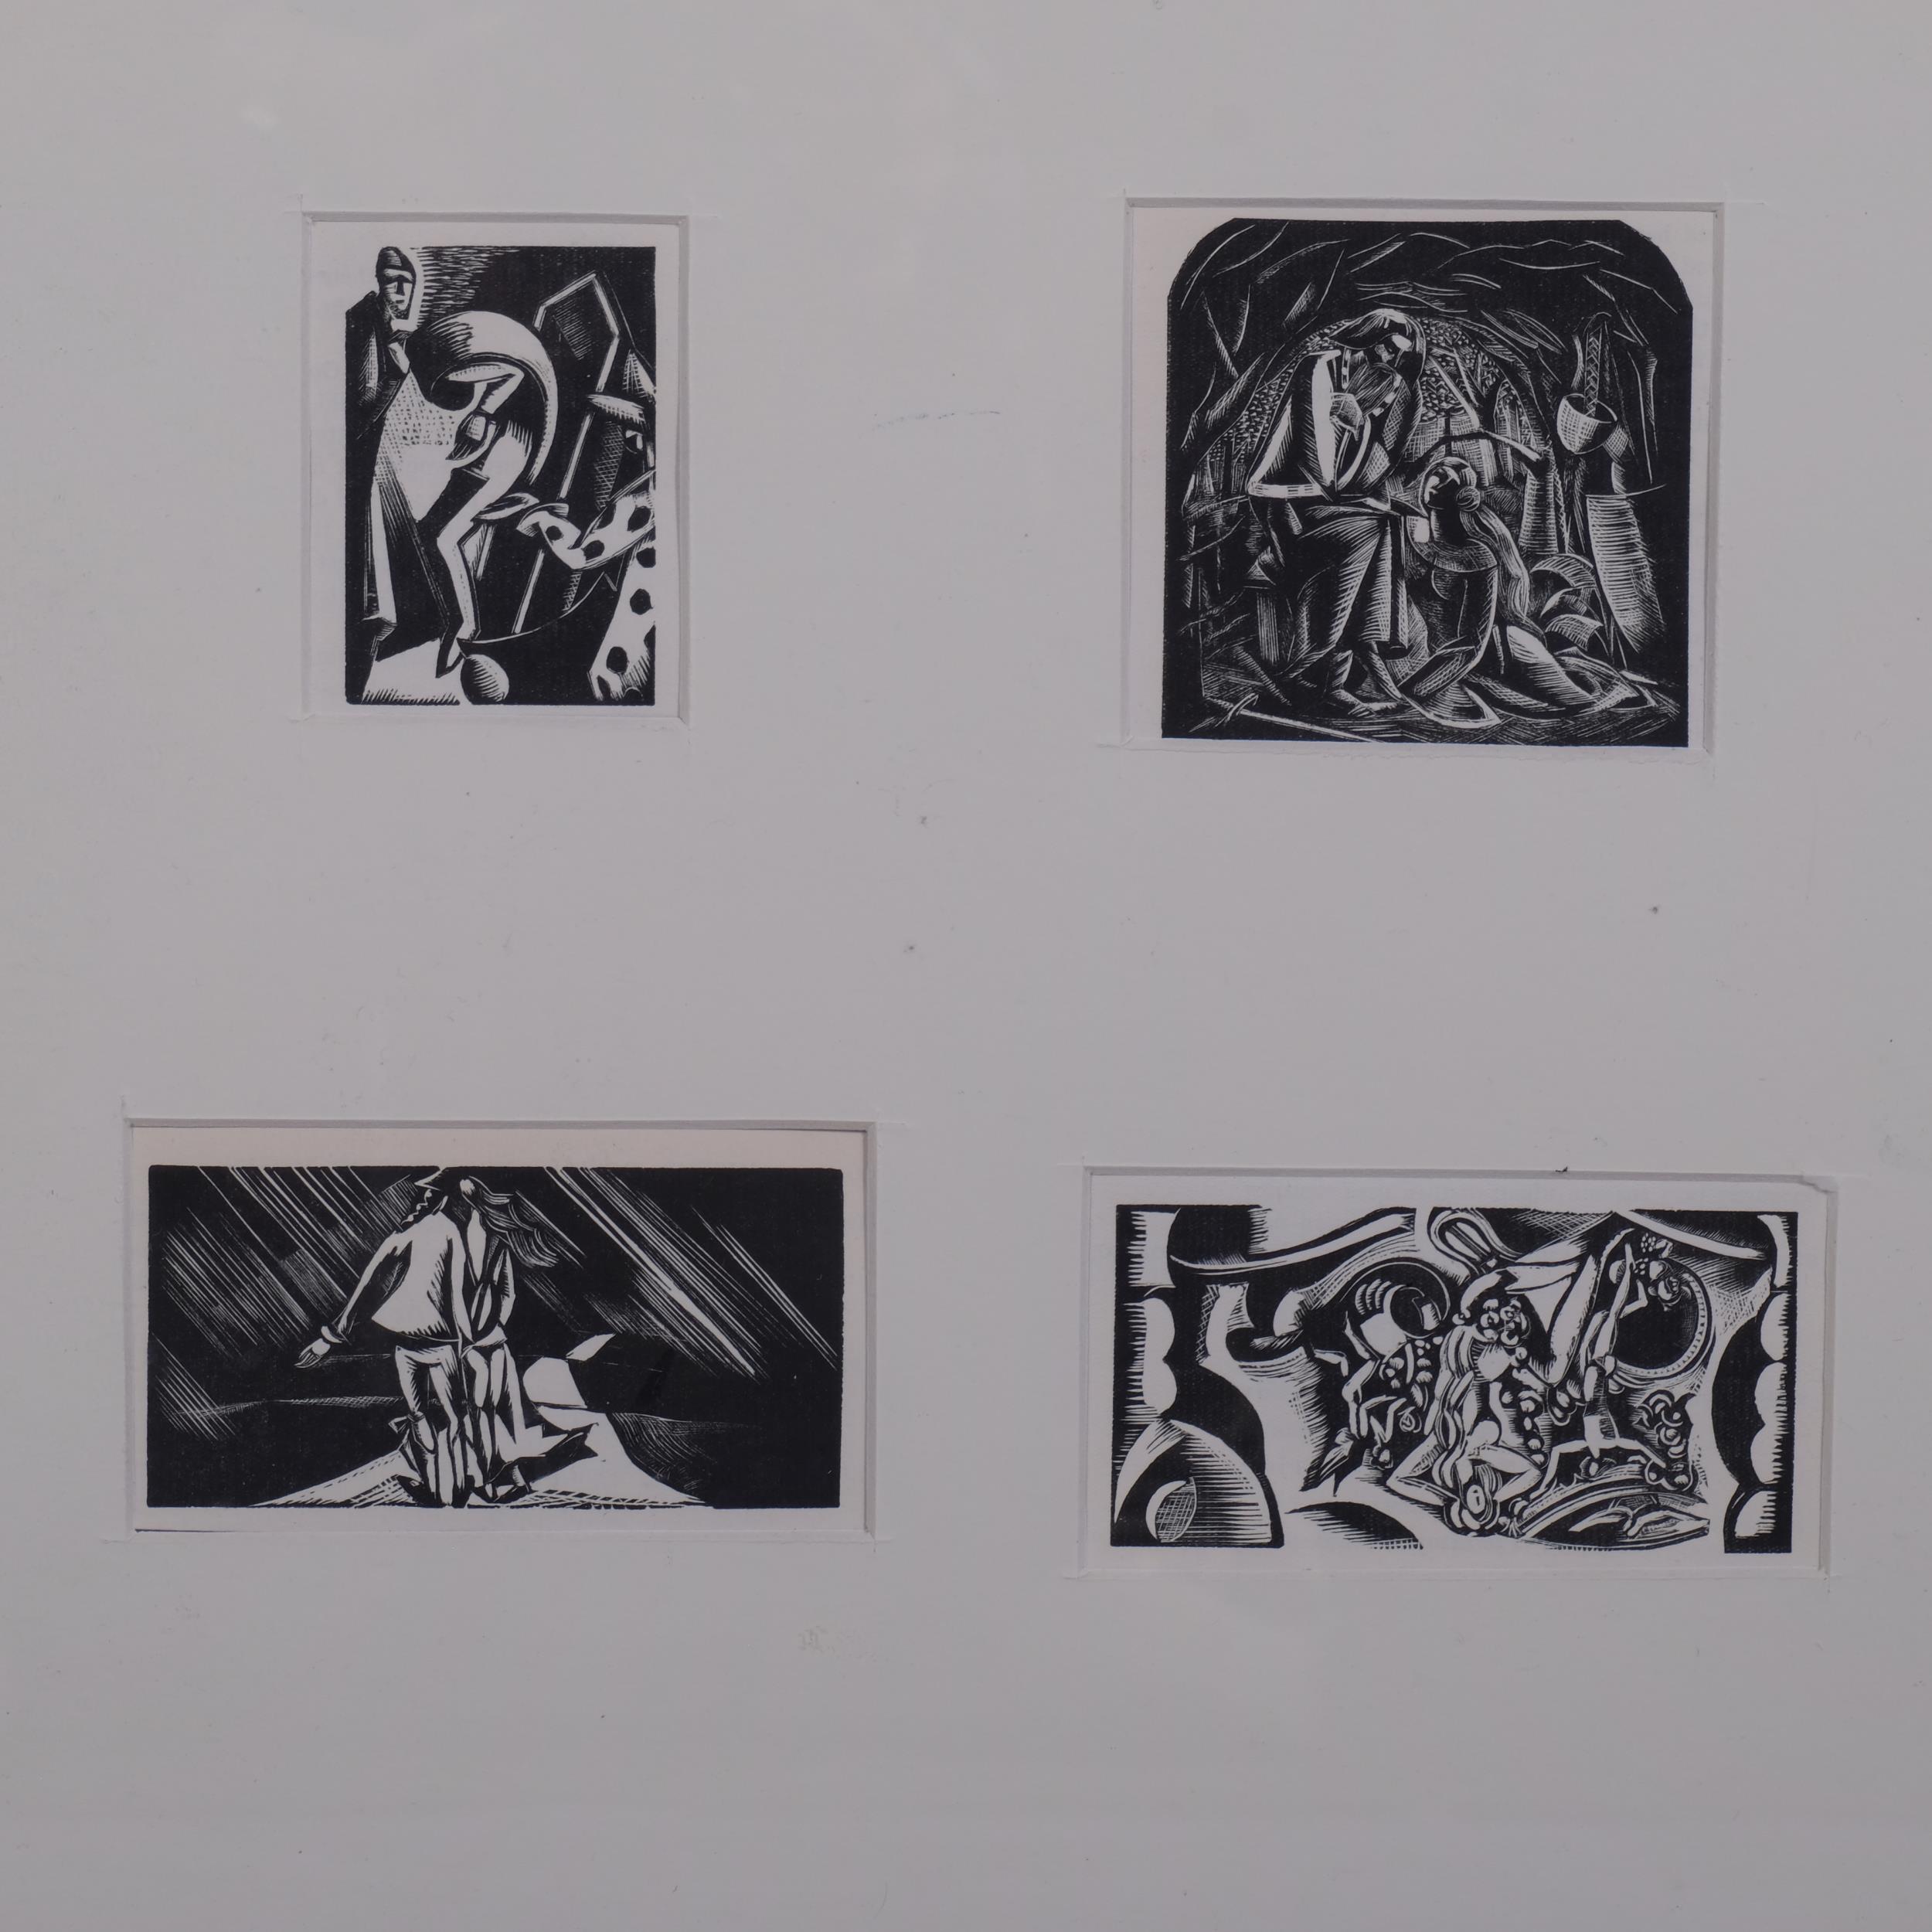 Paul Nash, 5 wood engravings, printed 1923 from an edition of 1000 copies, Postan W30 W37 W35 W33 - Image 2 of 4